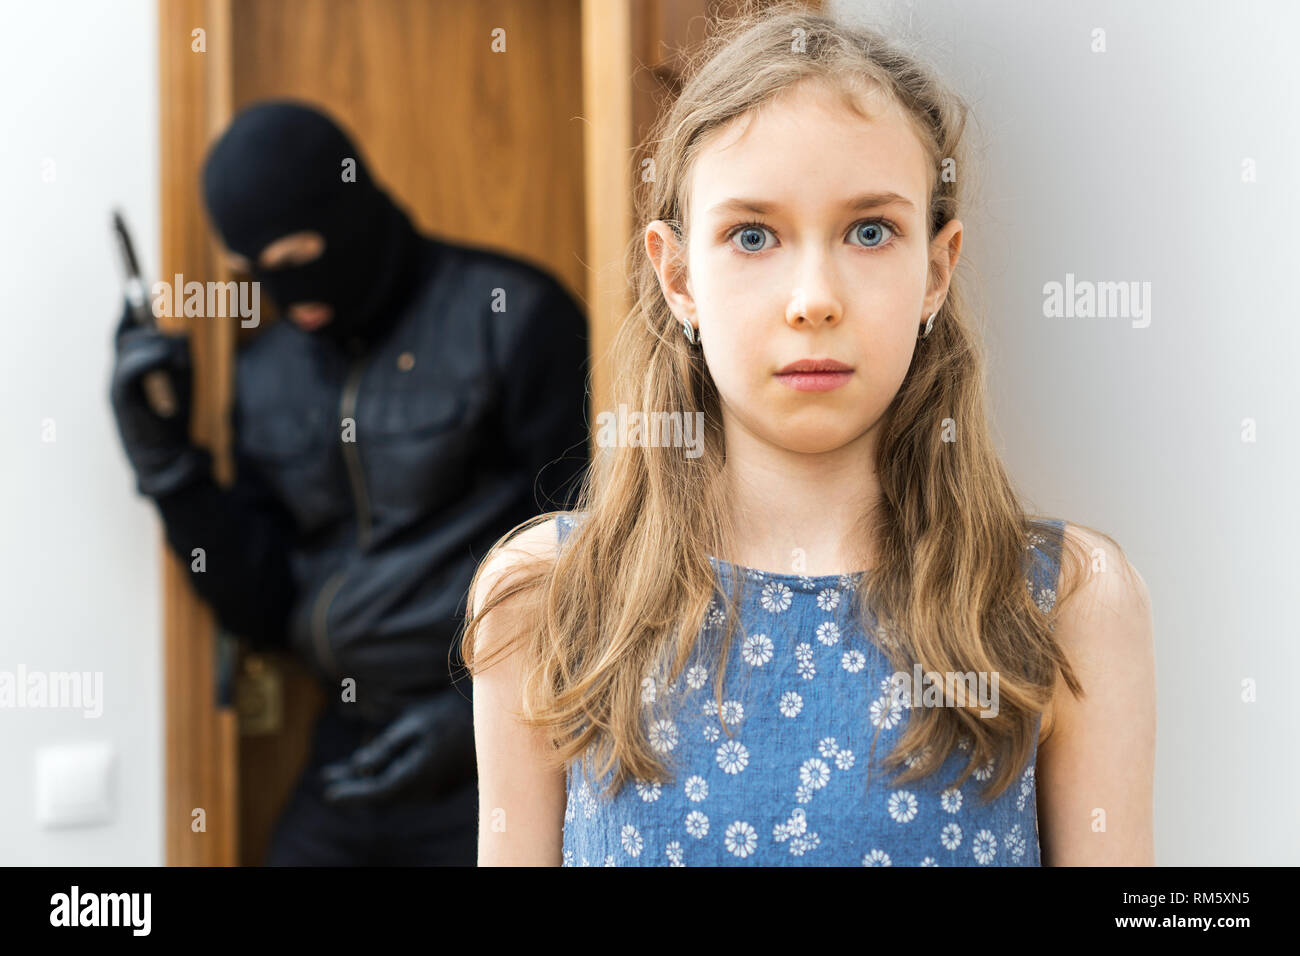 Shocked little girl and angry robber with gun in the background. Stock Photo